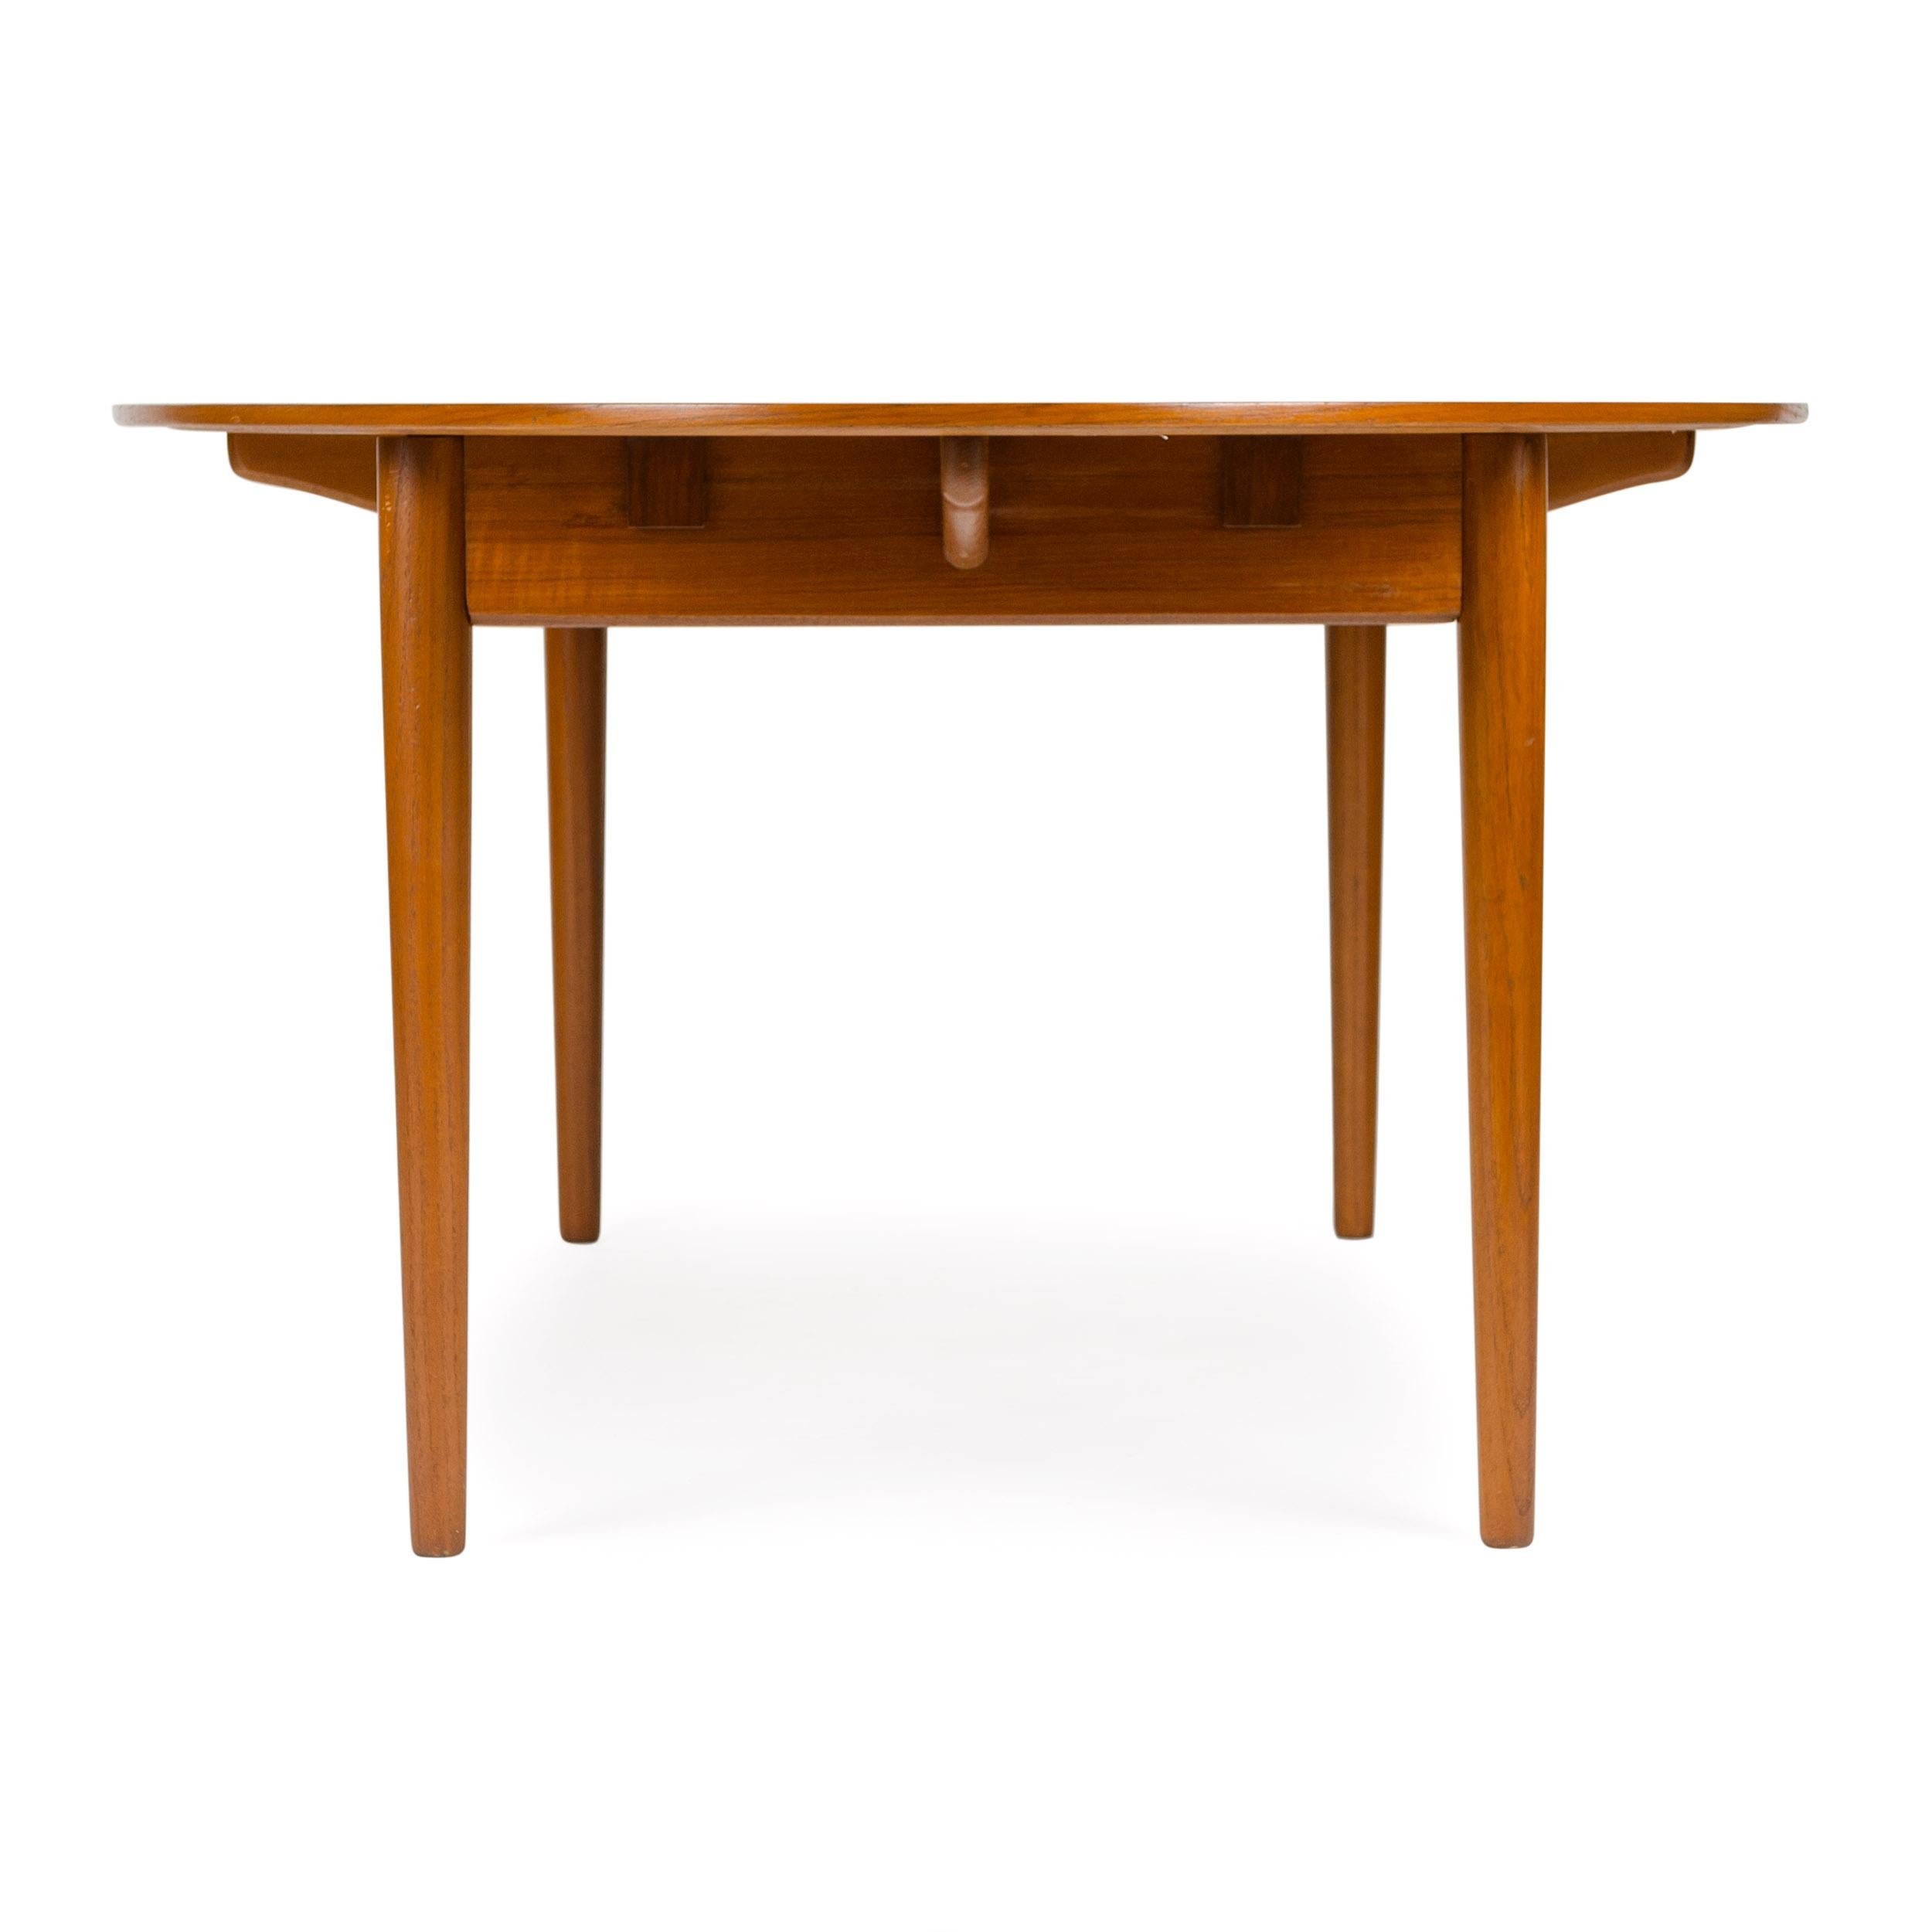 1950s Scandinavian Modern Judas Dining Table by Finn Juhl for Niels Vodder In Good Condition For Sale In Sagaponack, NY